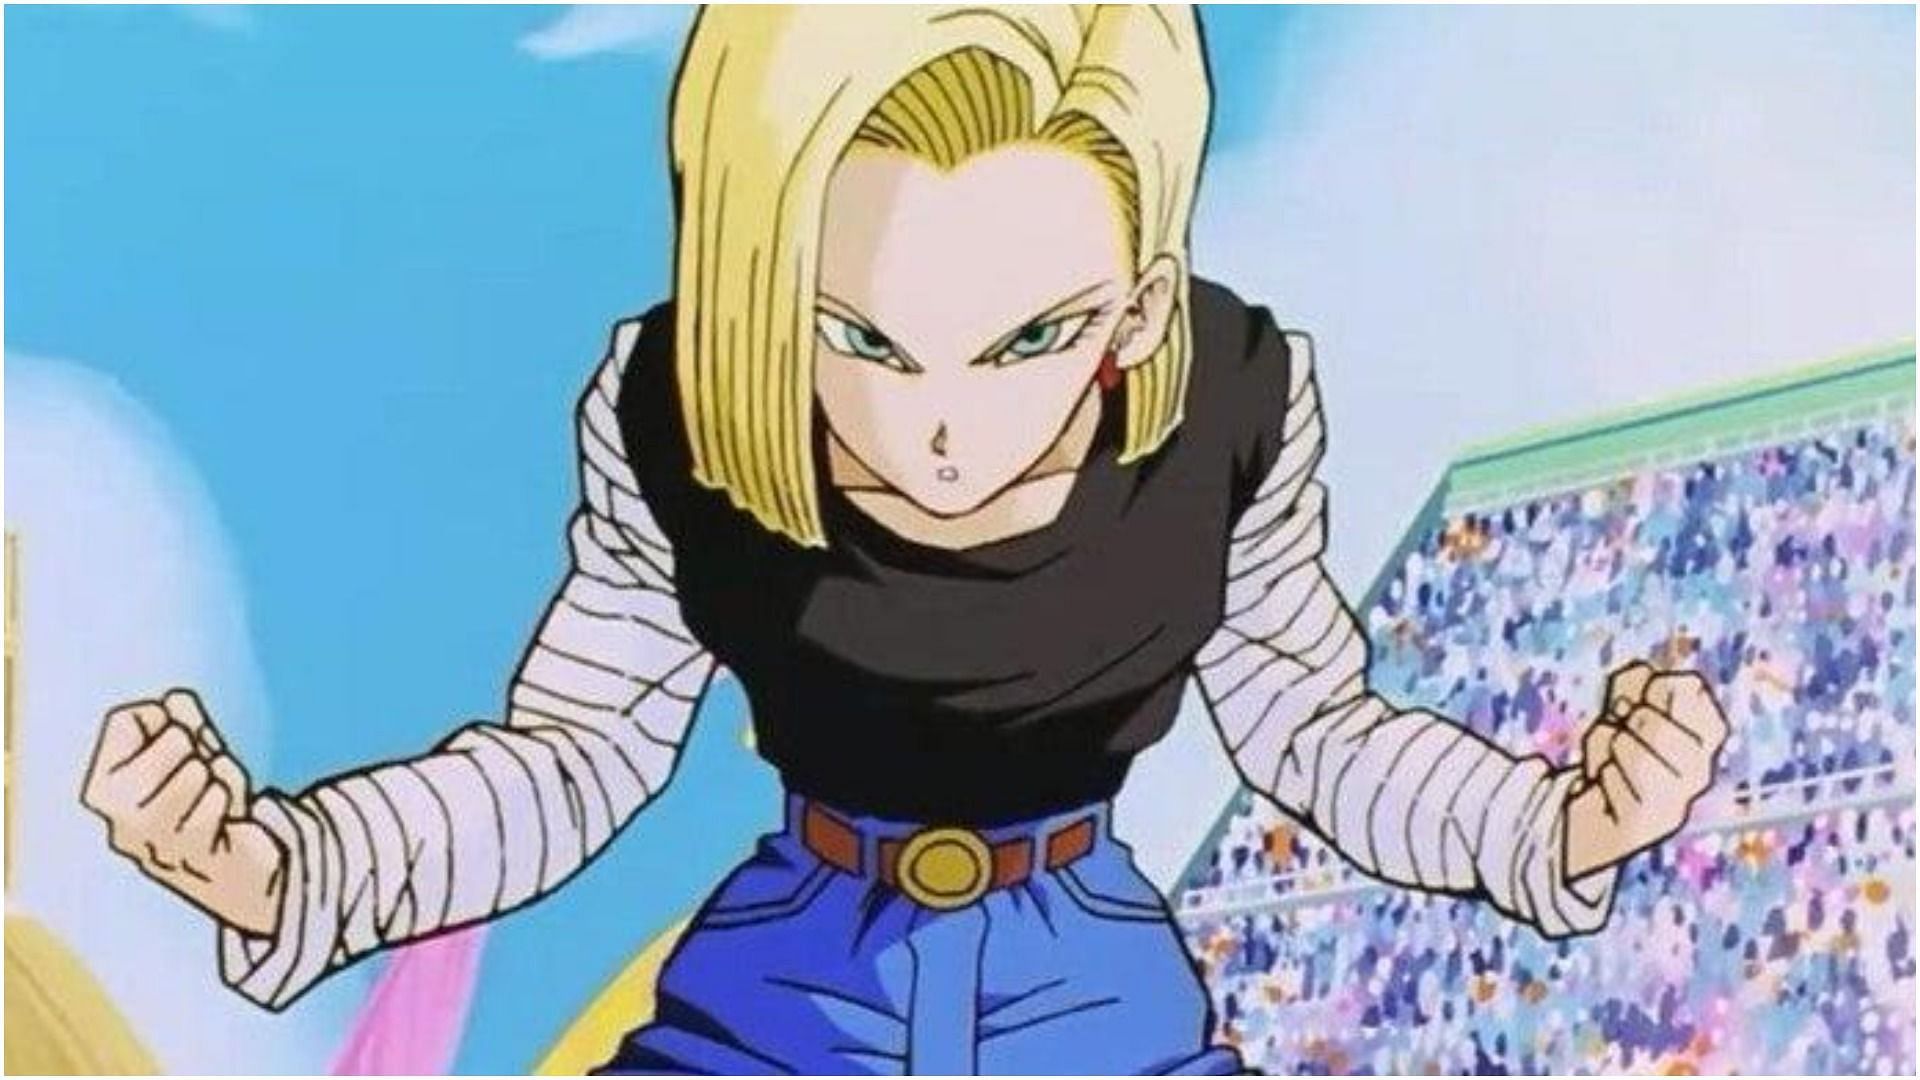 Android 18 as seen in the anime Dragon Ball (Image via Toei Animation)